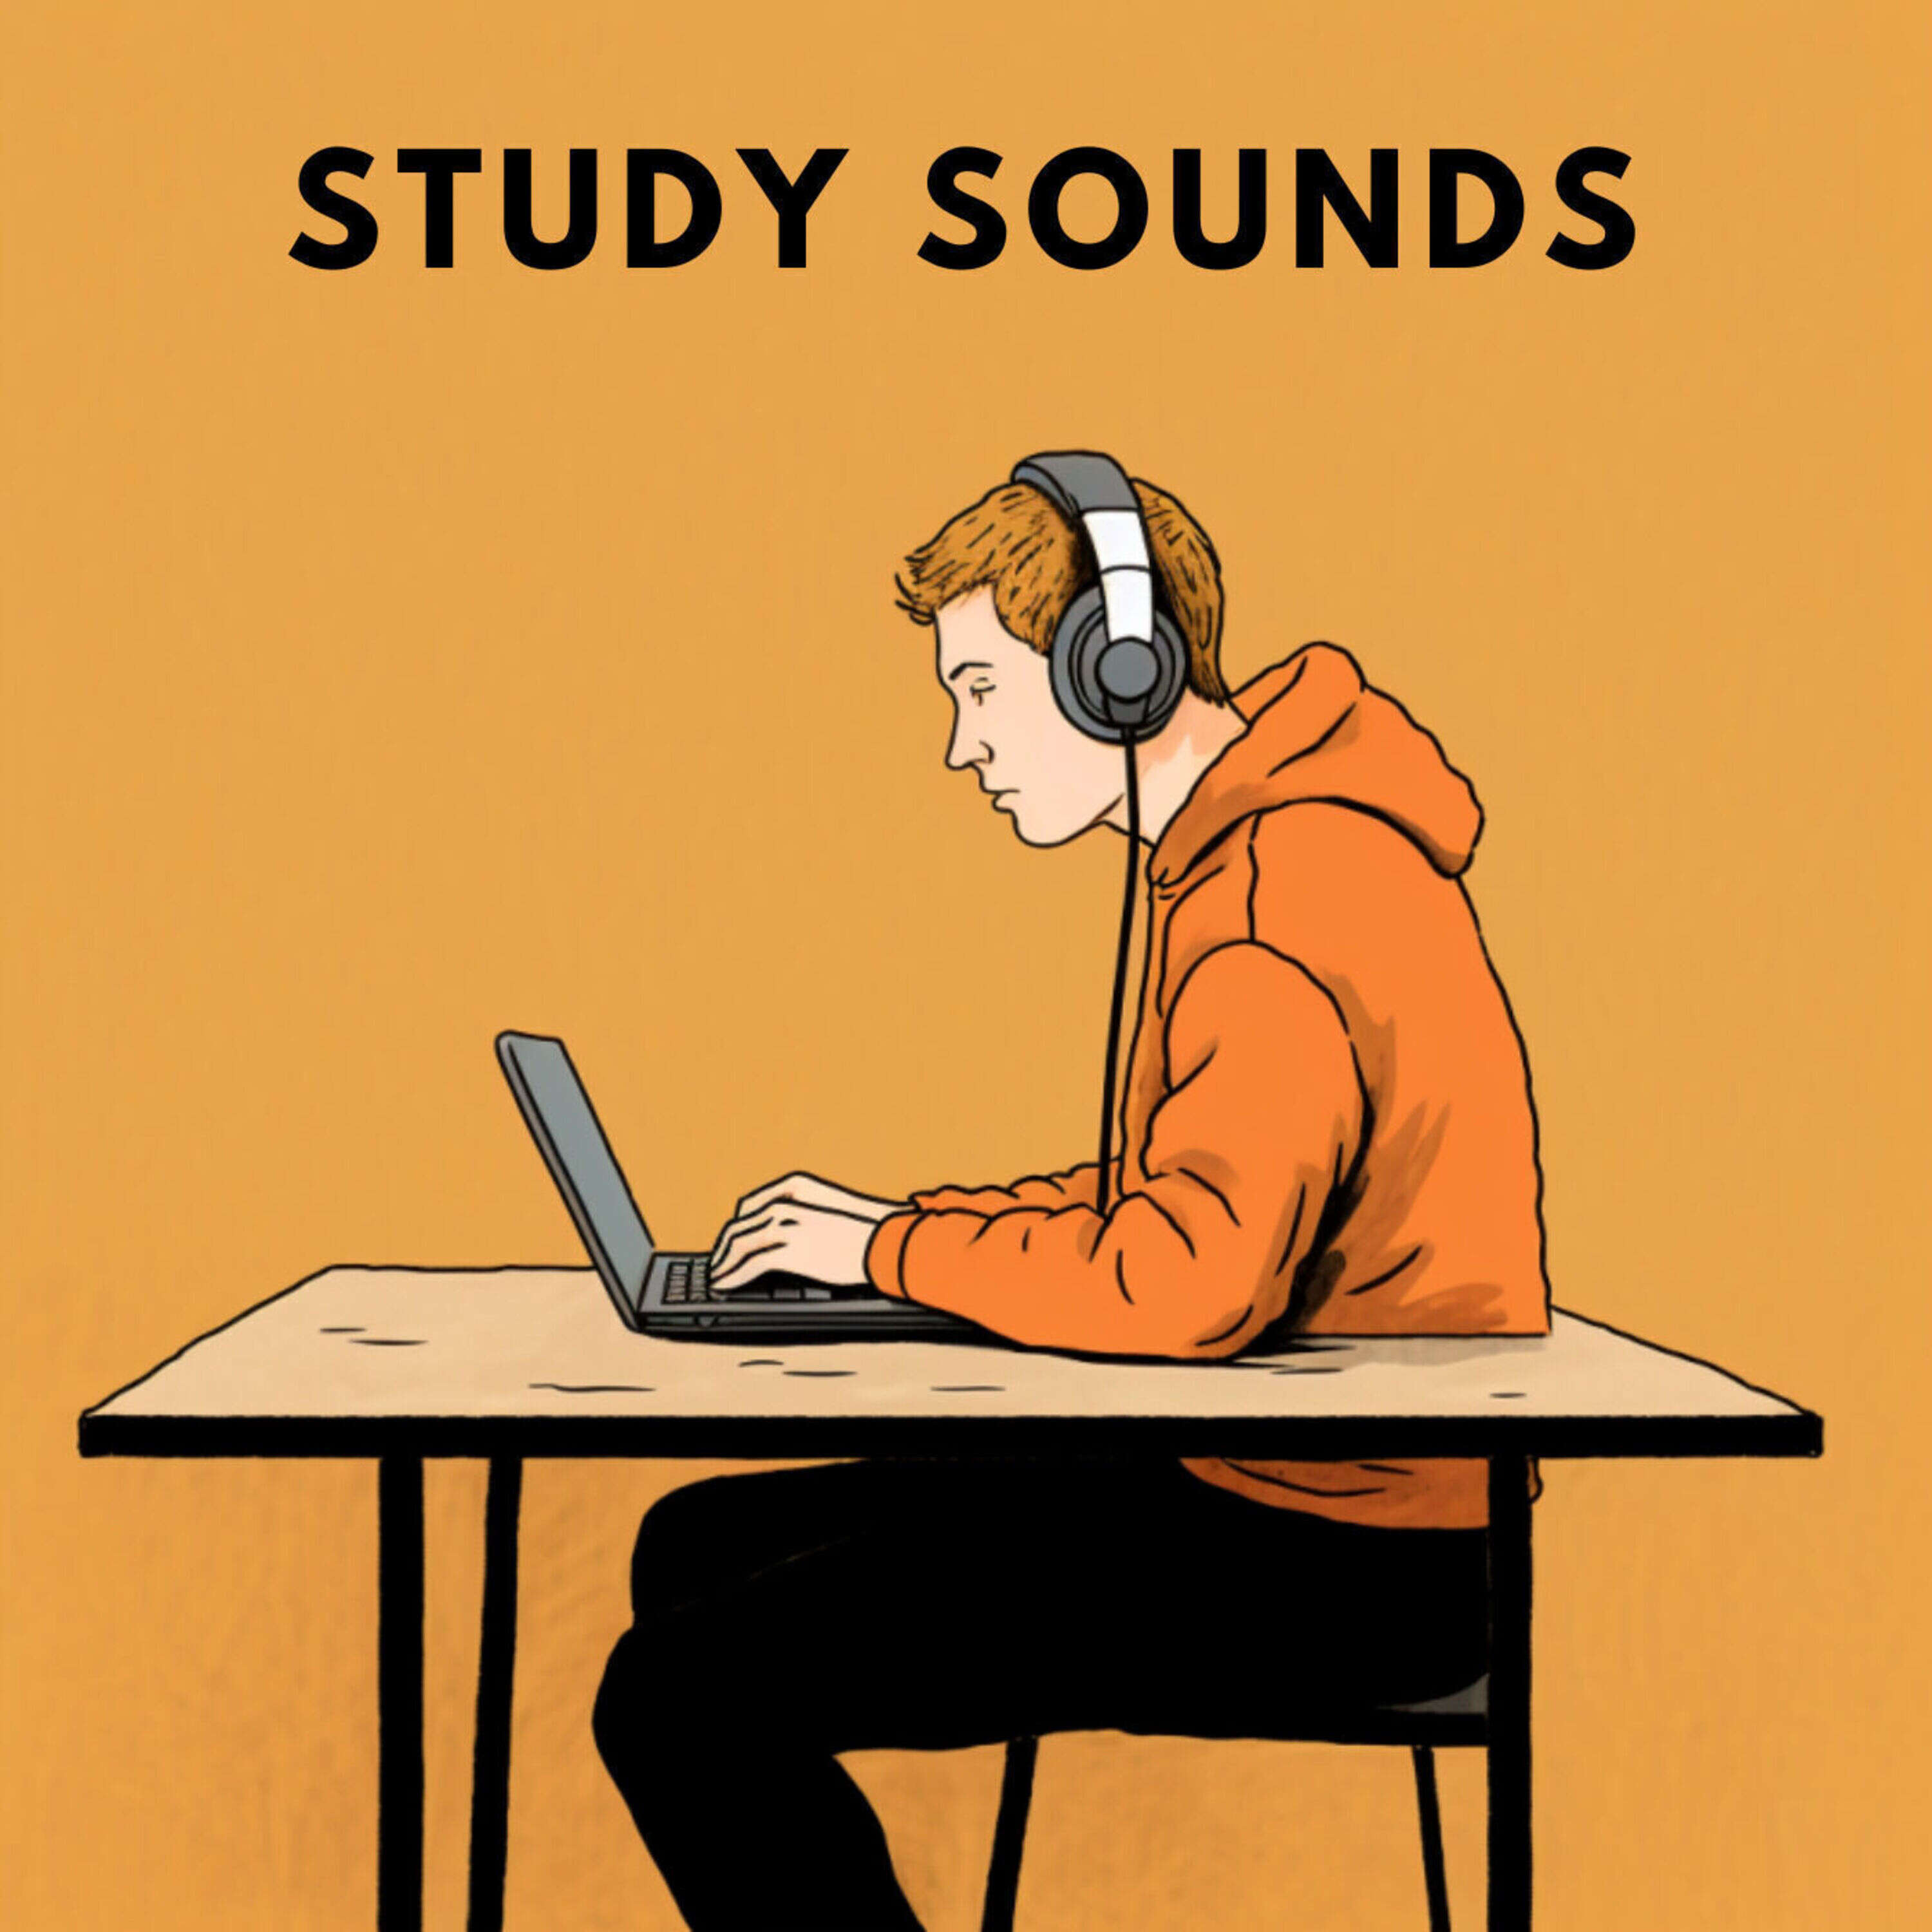 Memory retention: Sounds for studying, learning and remembering